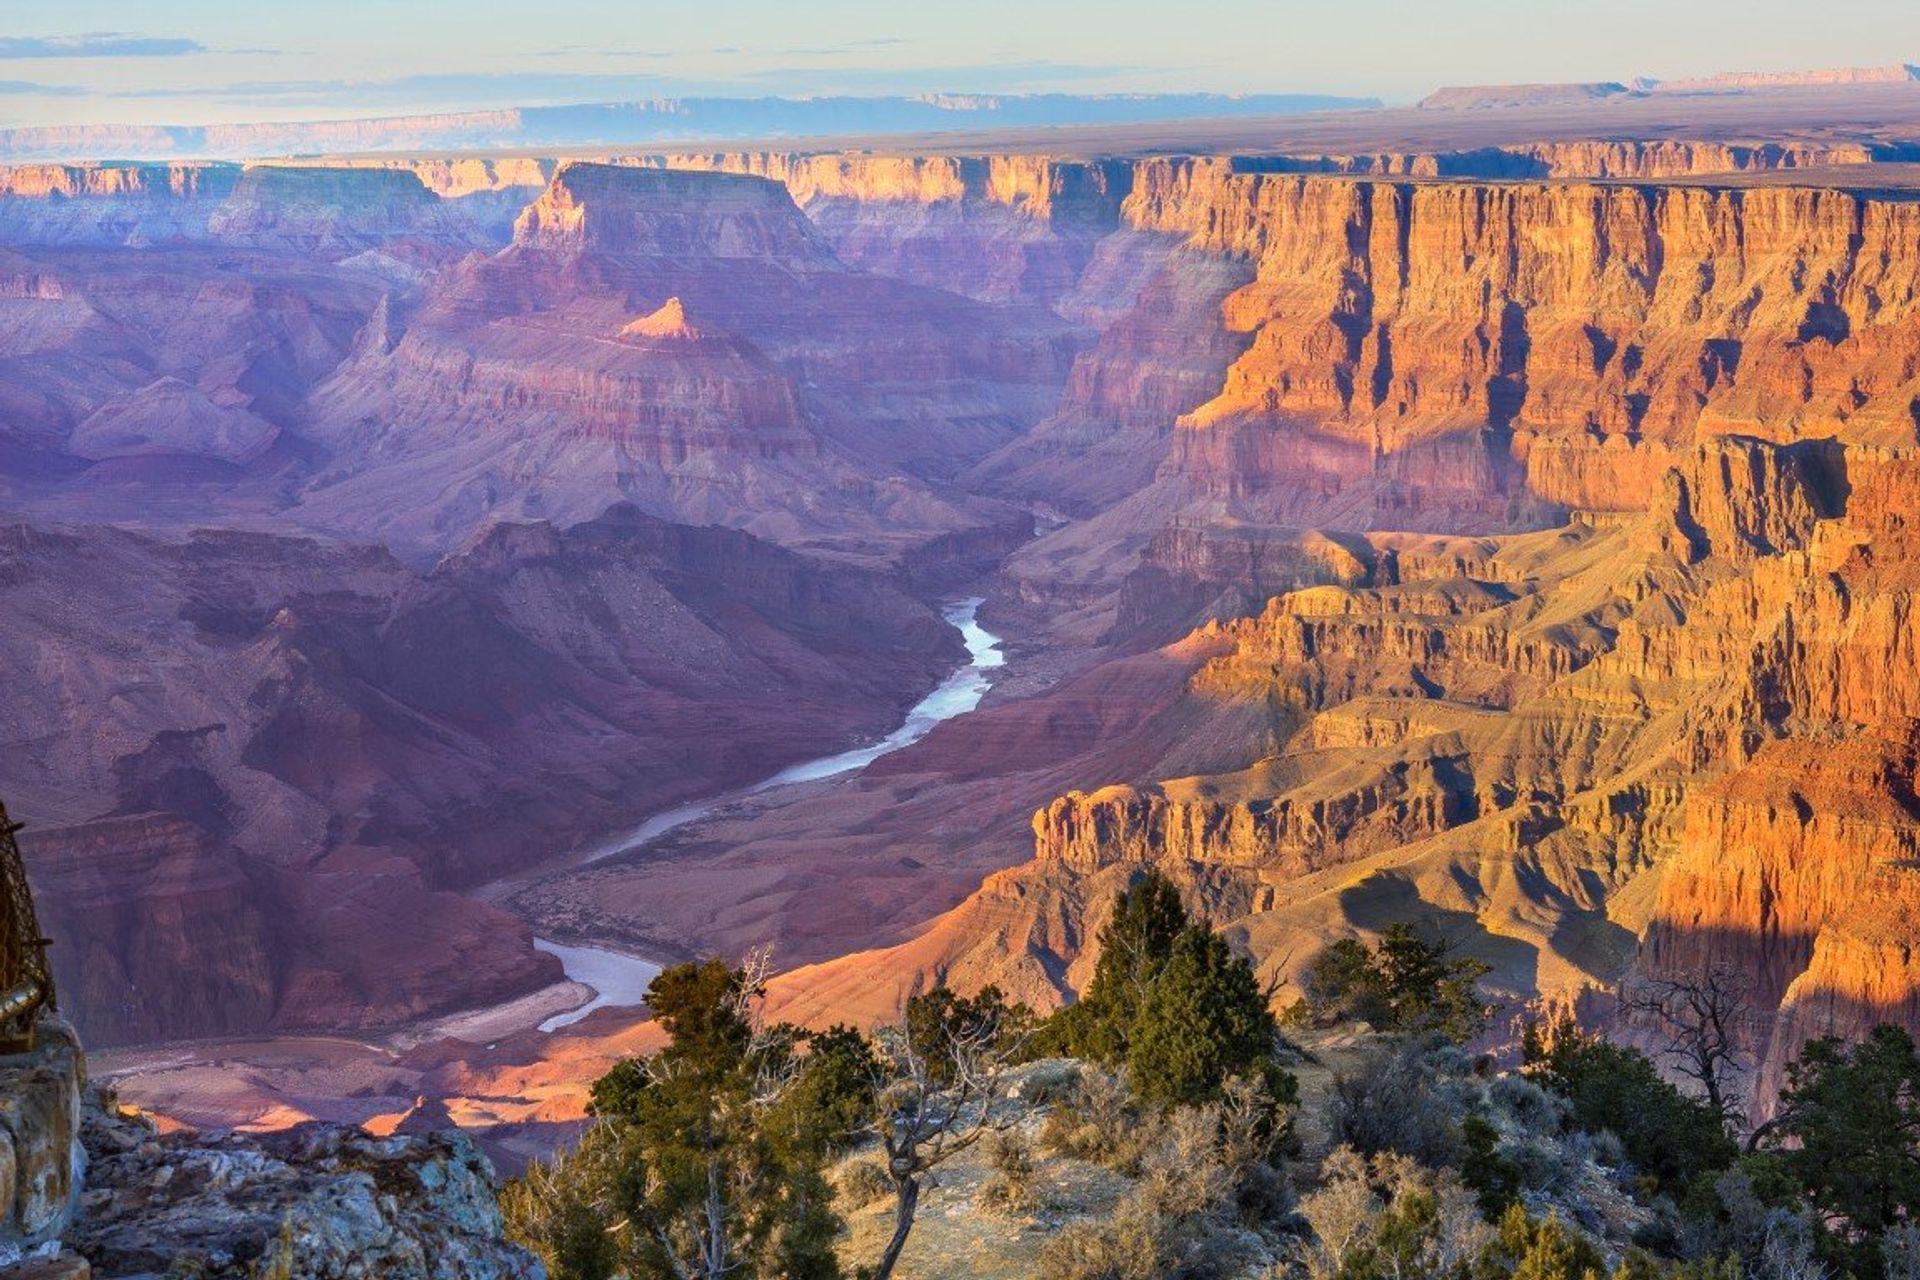 Take a helicopter ride over the Grand Canyon or canoe across the Colarado river for unbeatable panoramic views